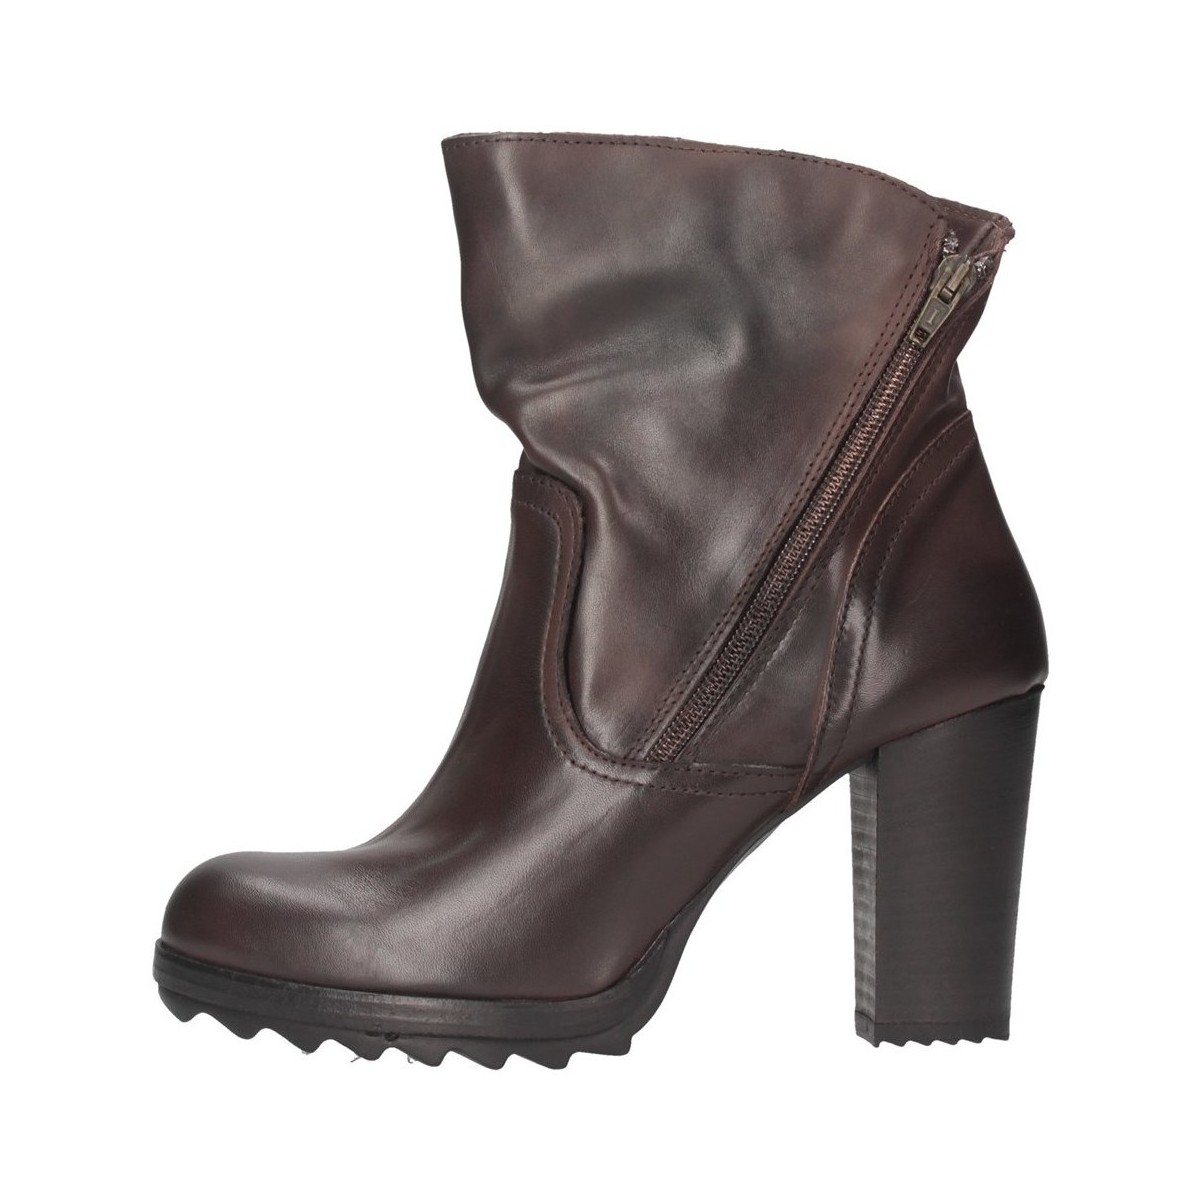 Chaussures Femme Low boots Made In Italia A01 TRONCHETTO Bottes et bottines Femme T.Moro Marron